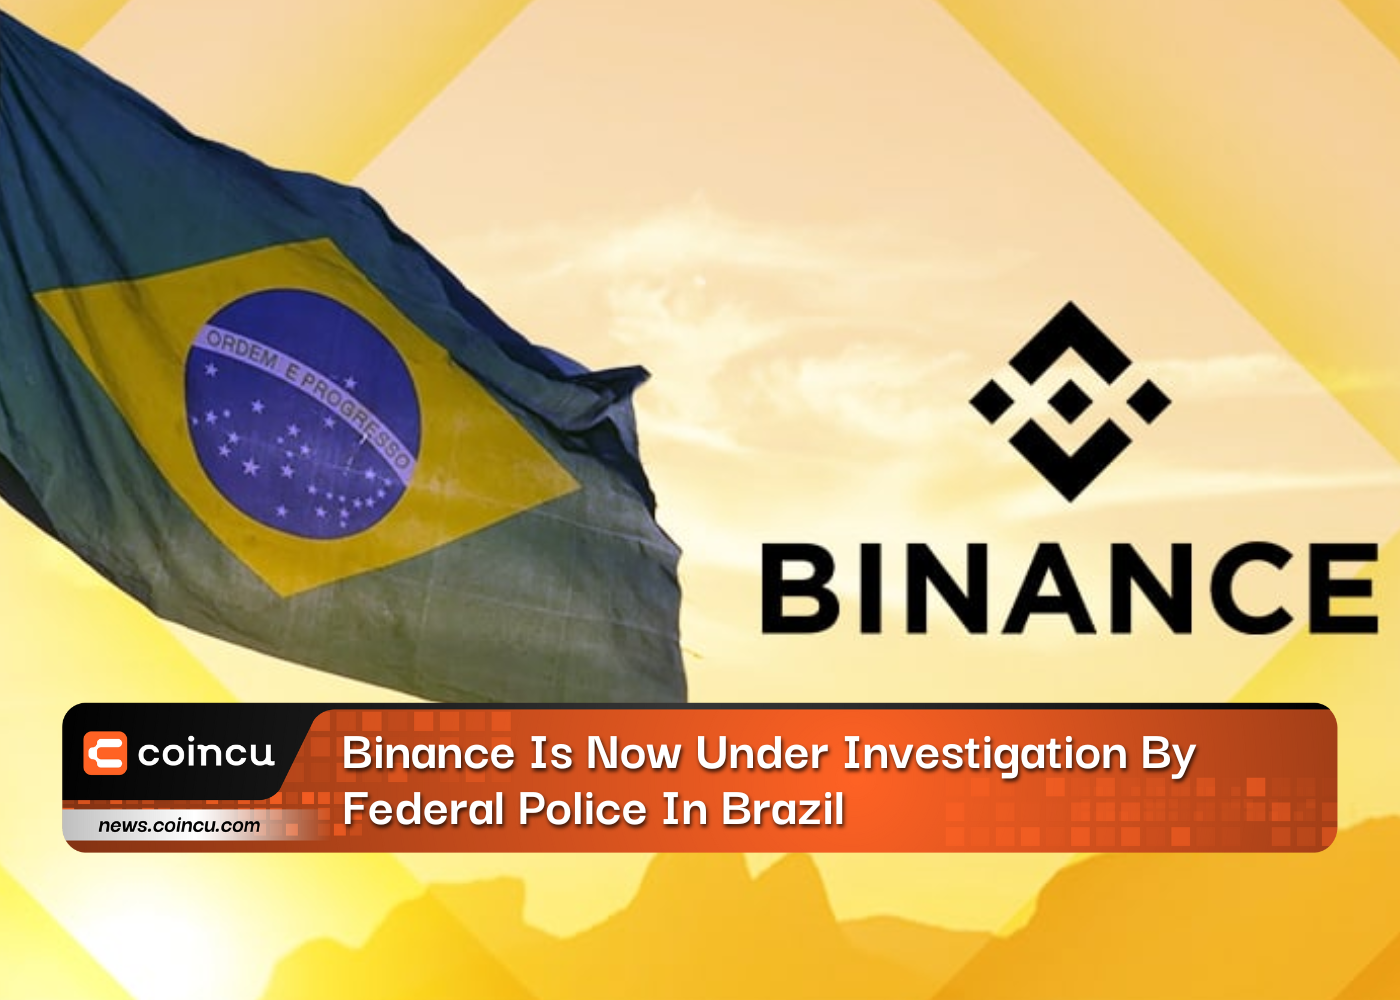 Binance Is Now Under Investigation By Federal Police In Brazil